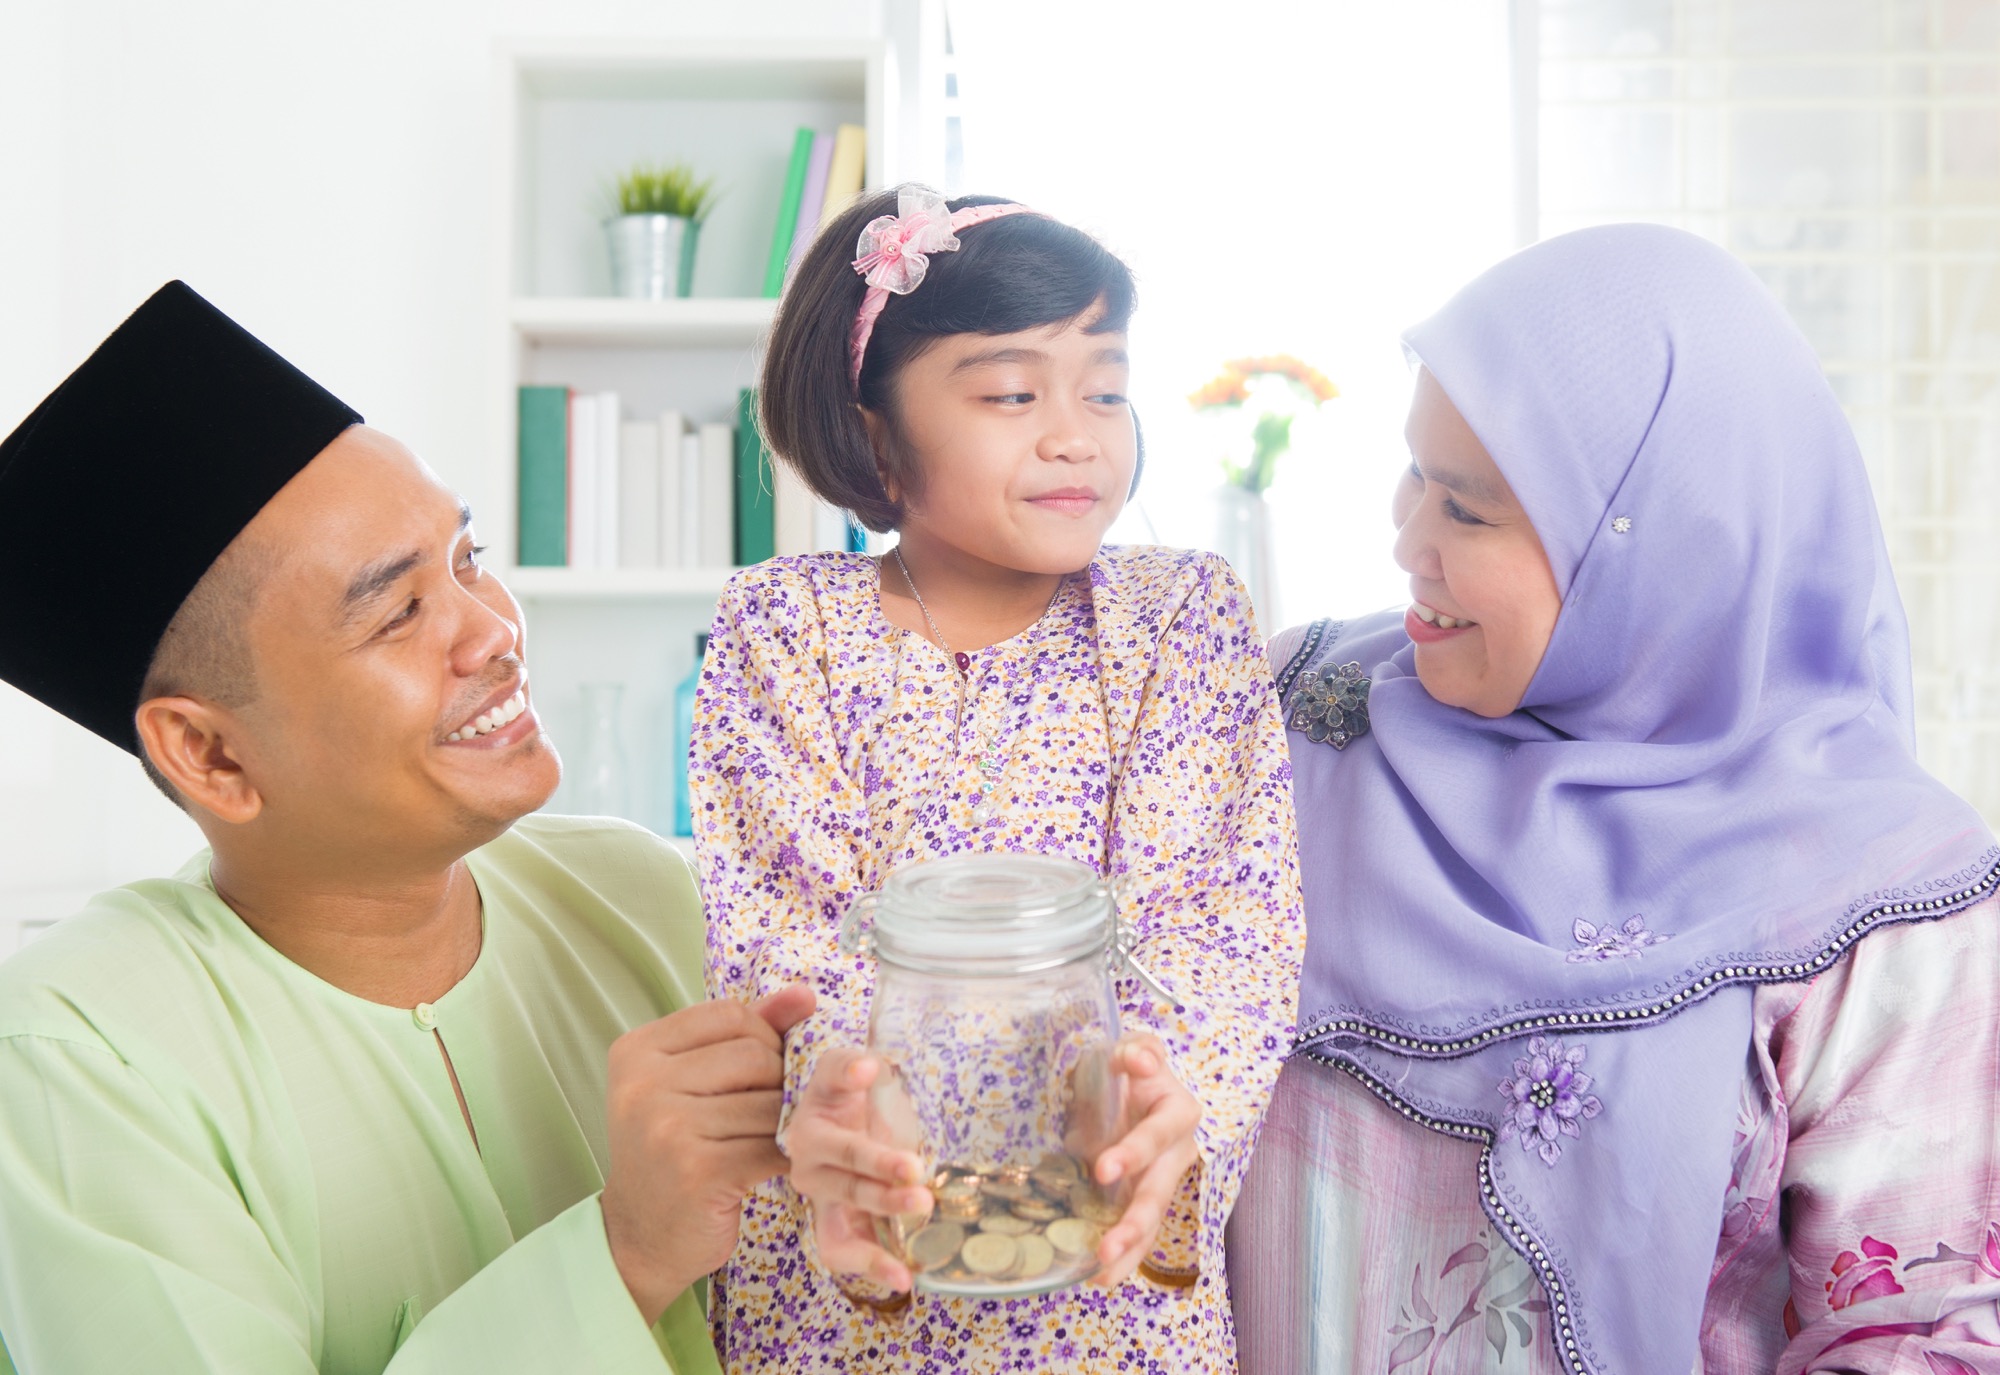 Make a smart move by savings for future higher education with takaful protection